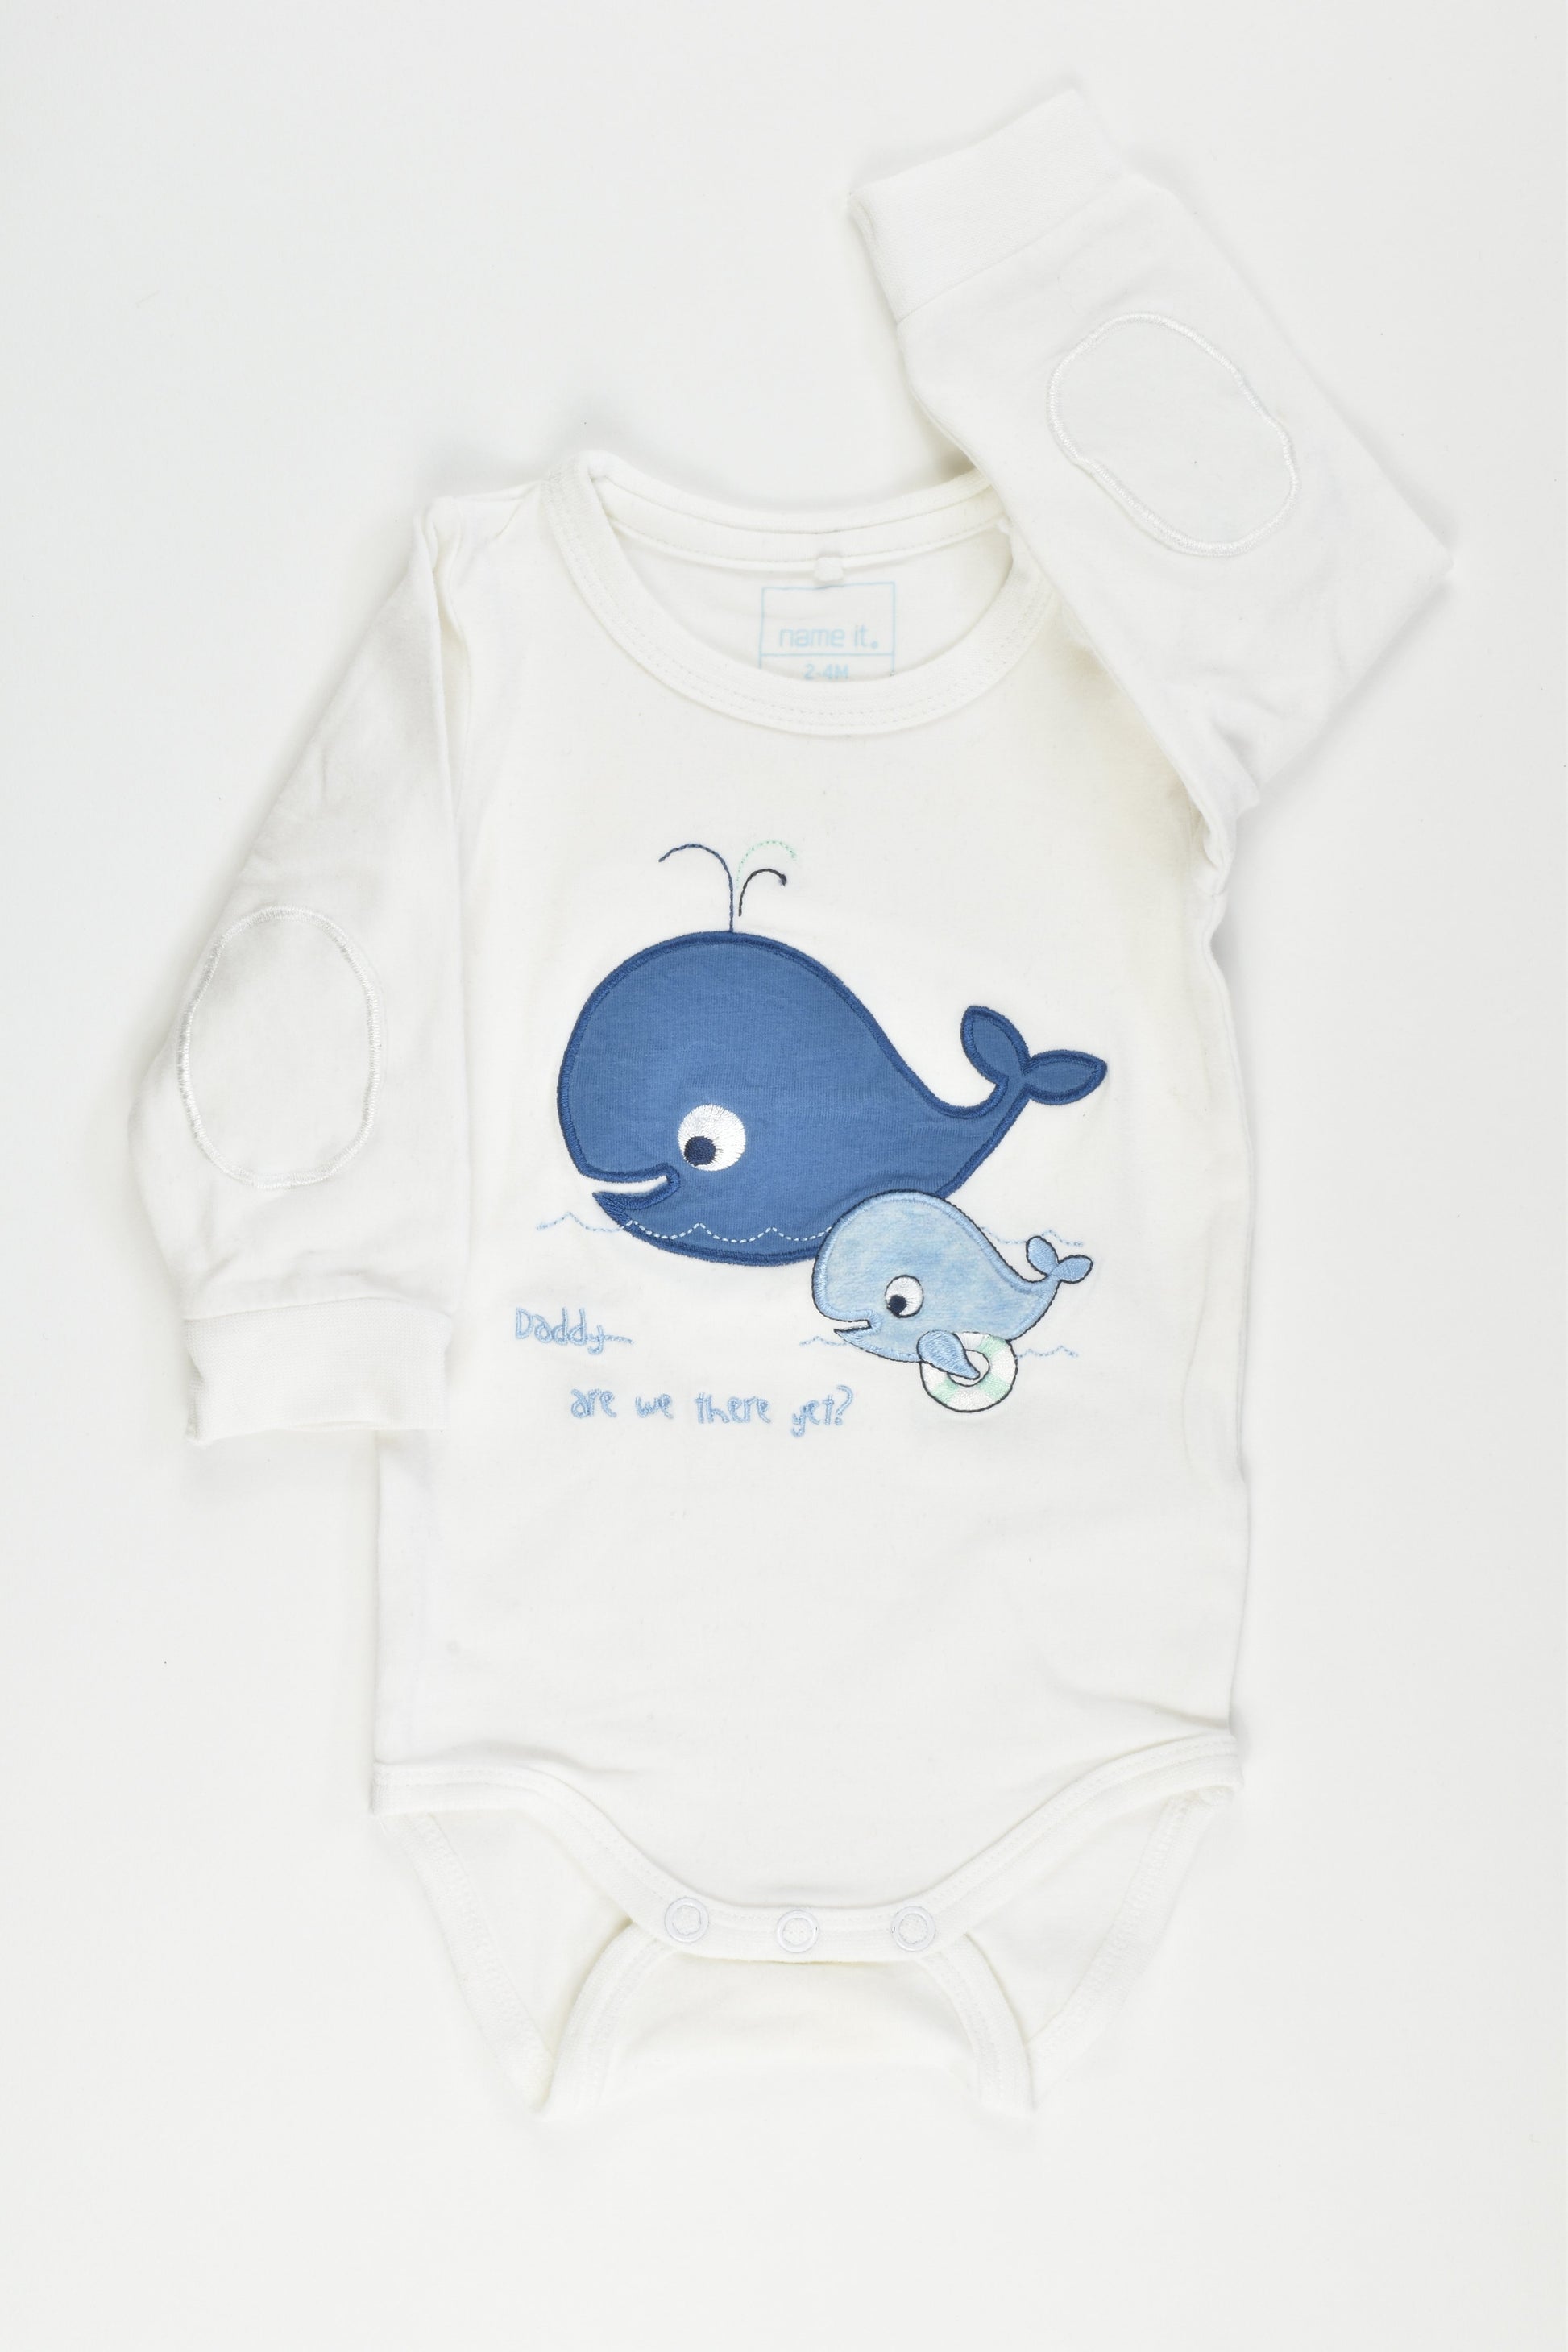 Name It Size 62 cm (2-4 months) "Daddy, Are We There Yet" Bodysuit